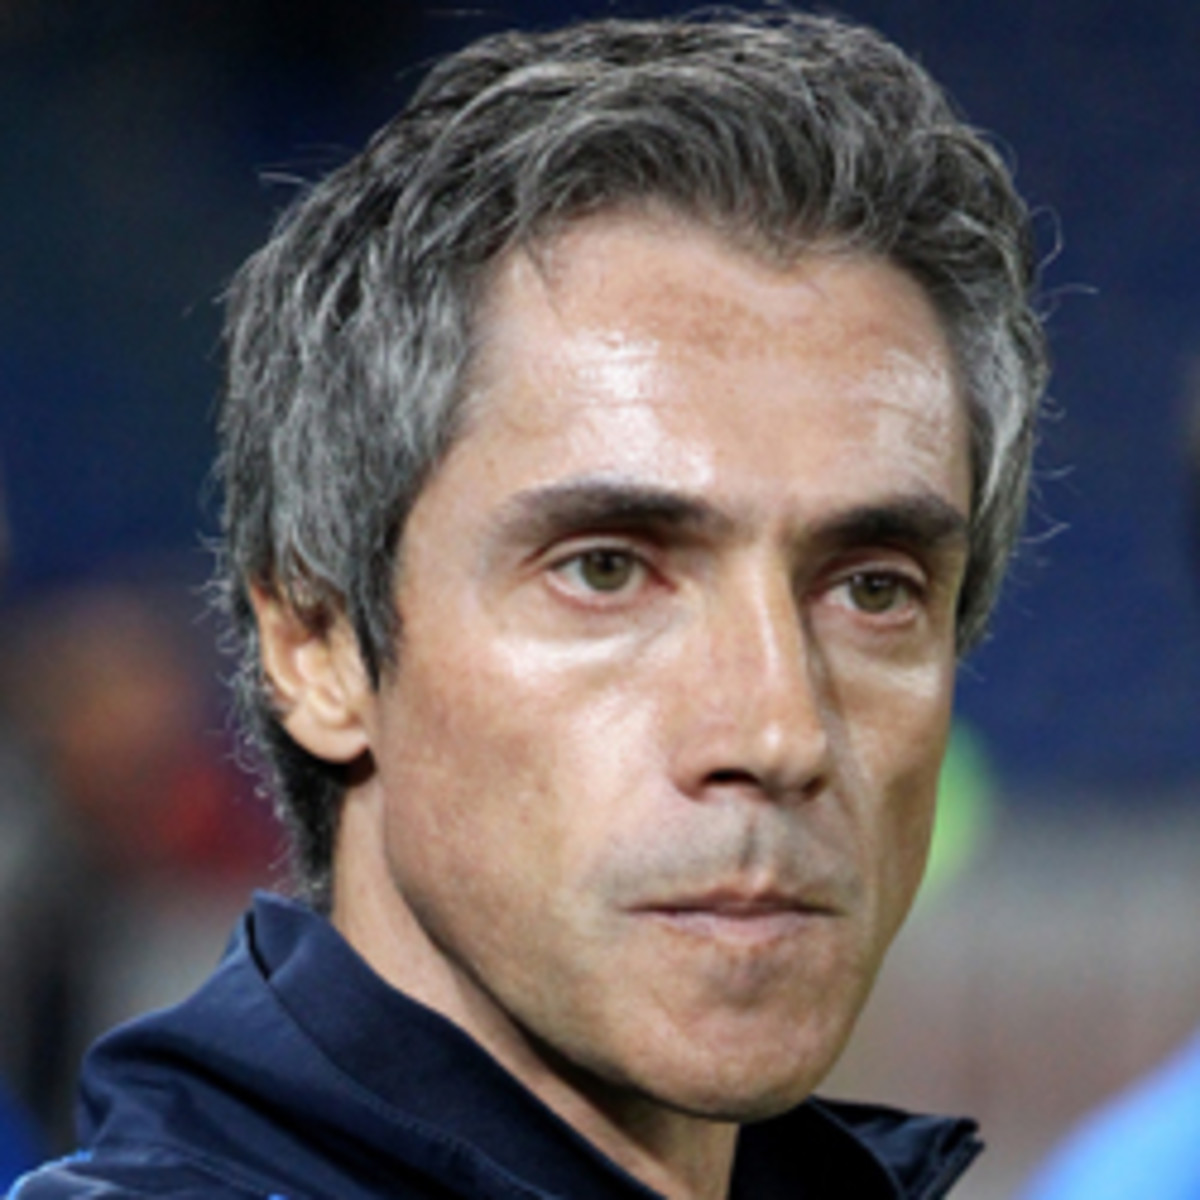 New Red Bulls coach Paulo Sousa was a member of the Portuguese Golden Generation. (EuroFootball/Getty Images)